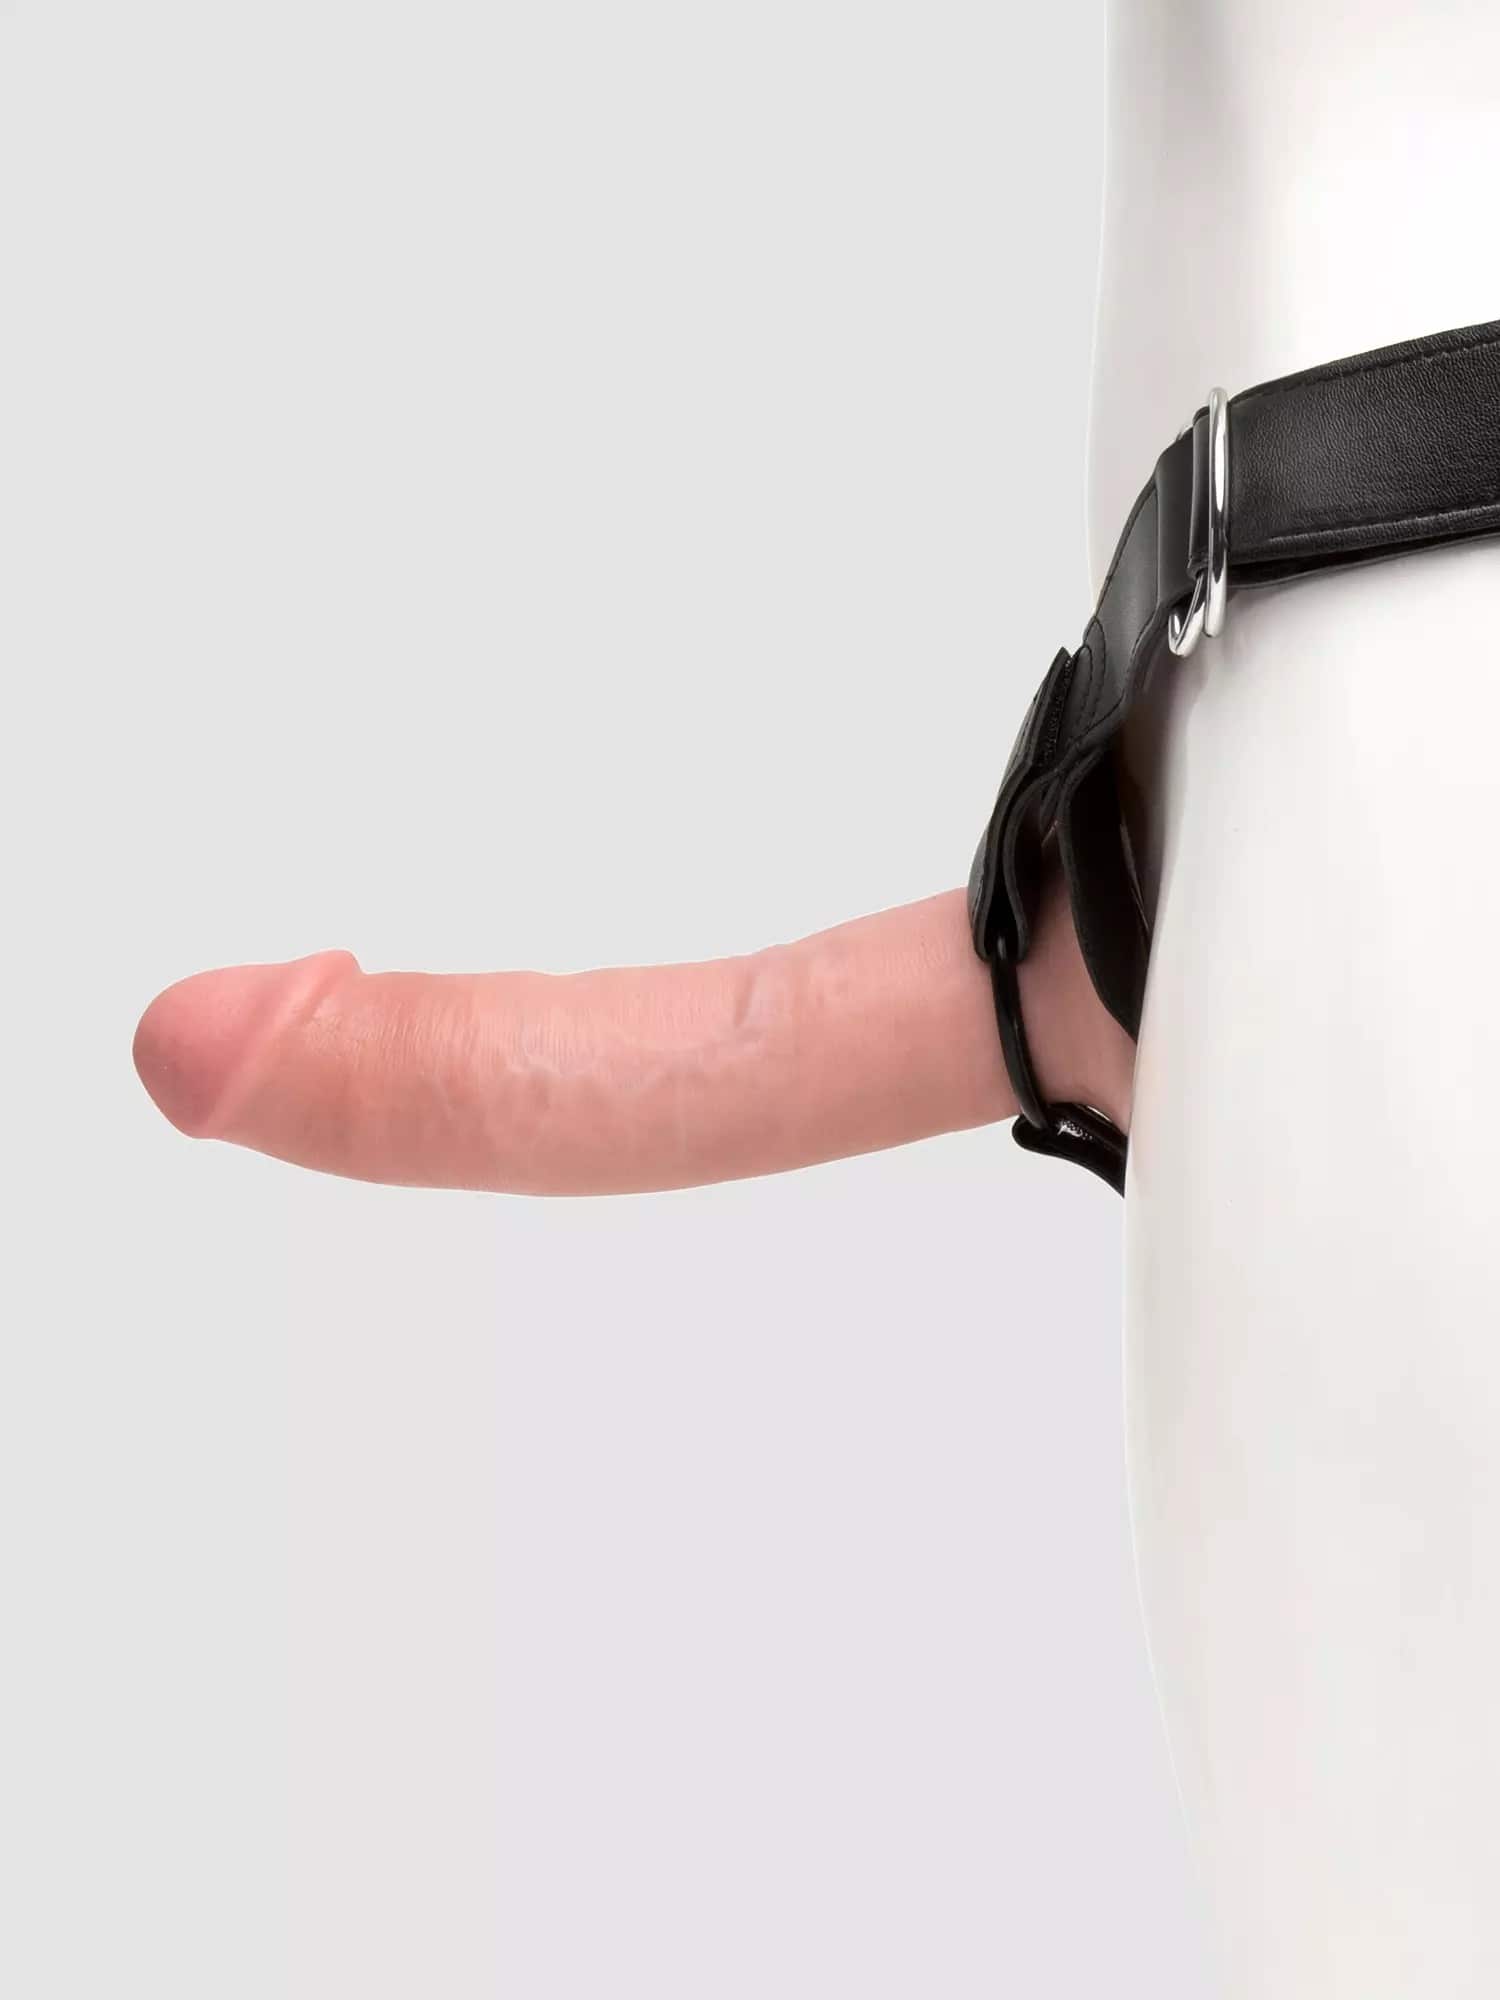 King Cock Strap-On Harness Kit with Ultra Realistic Dildo 9 Inch. Slide 3